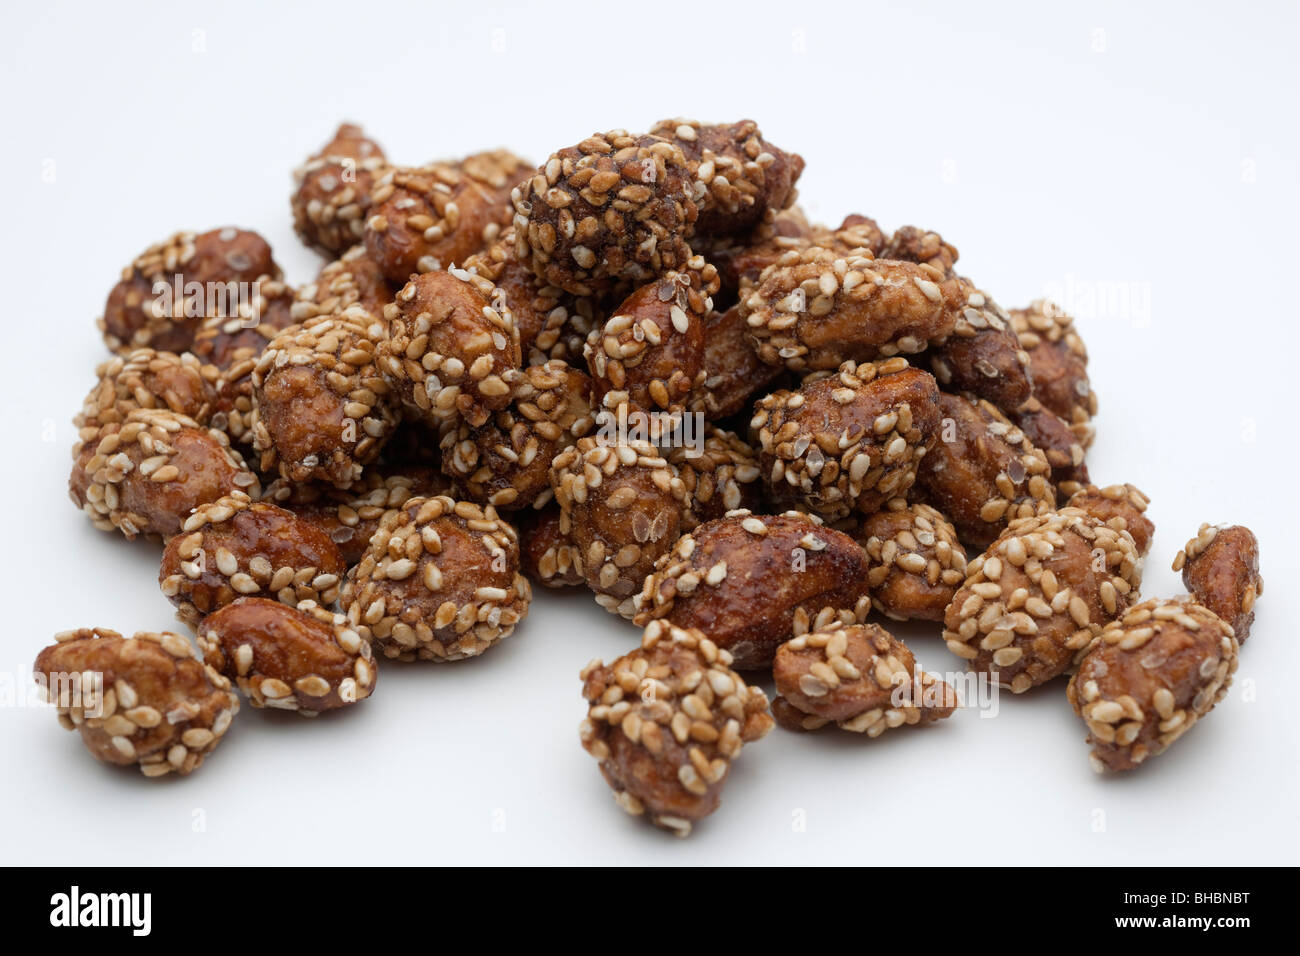 Pile of caramel coated roasted peanuts sprinkled with sesame seeds Stock Photo